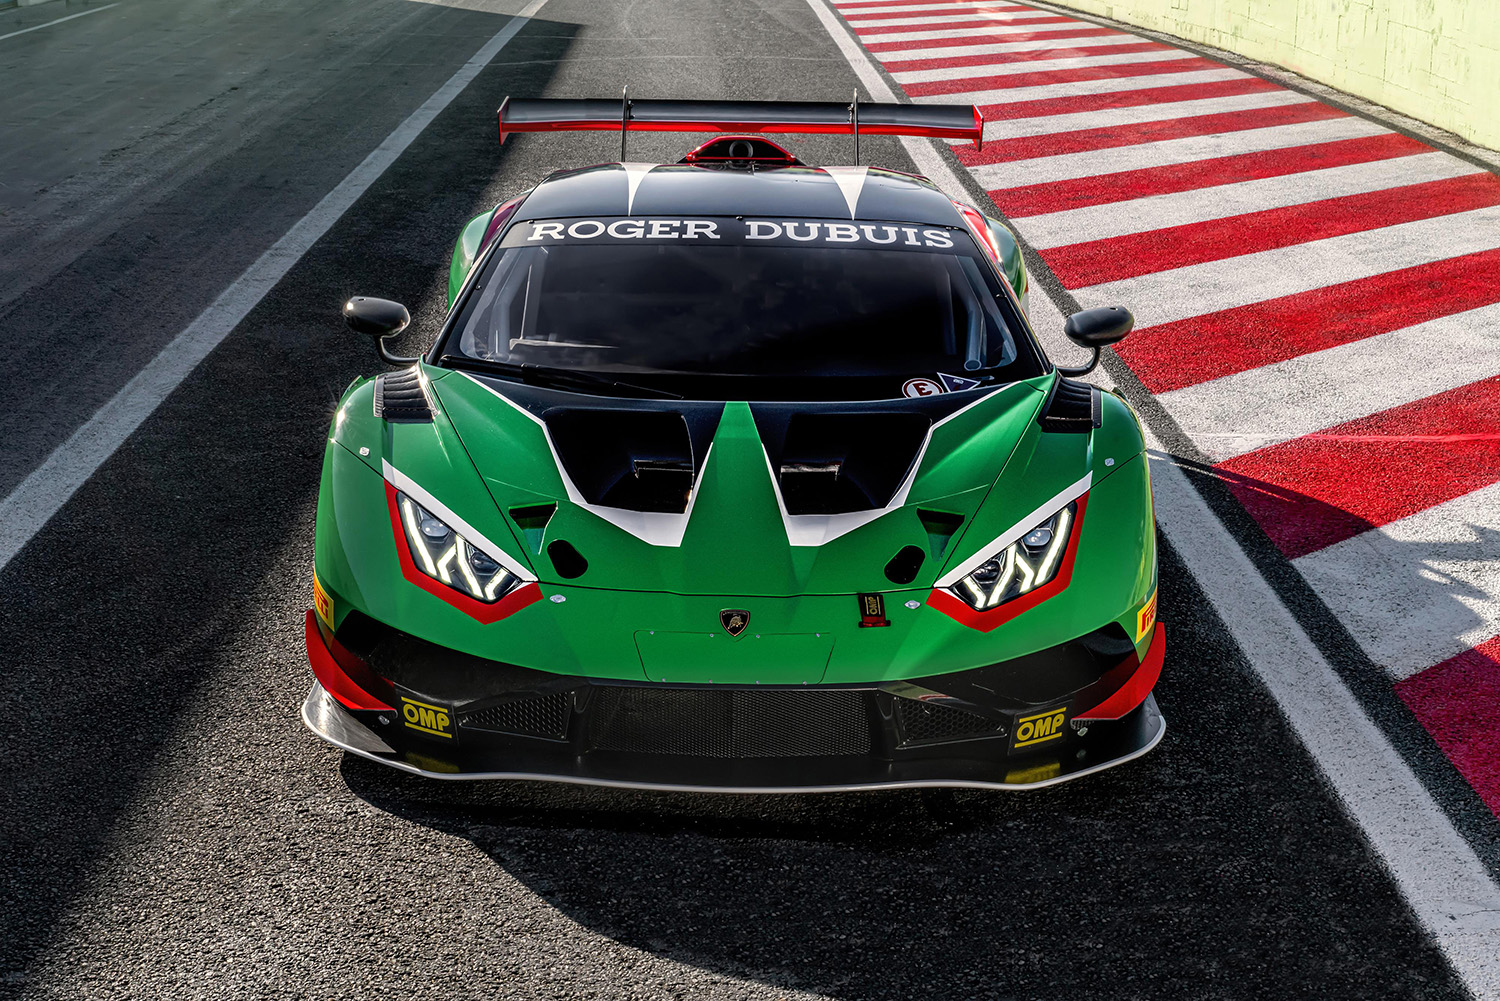 Front end of new Lamborghini Huracan GT3 EVO2 STO based supercar race car on track